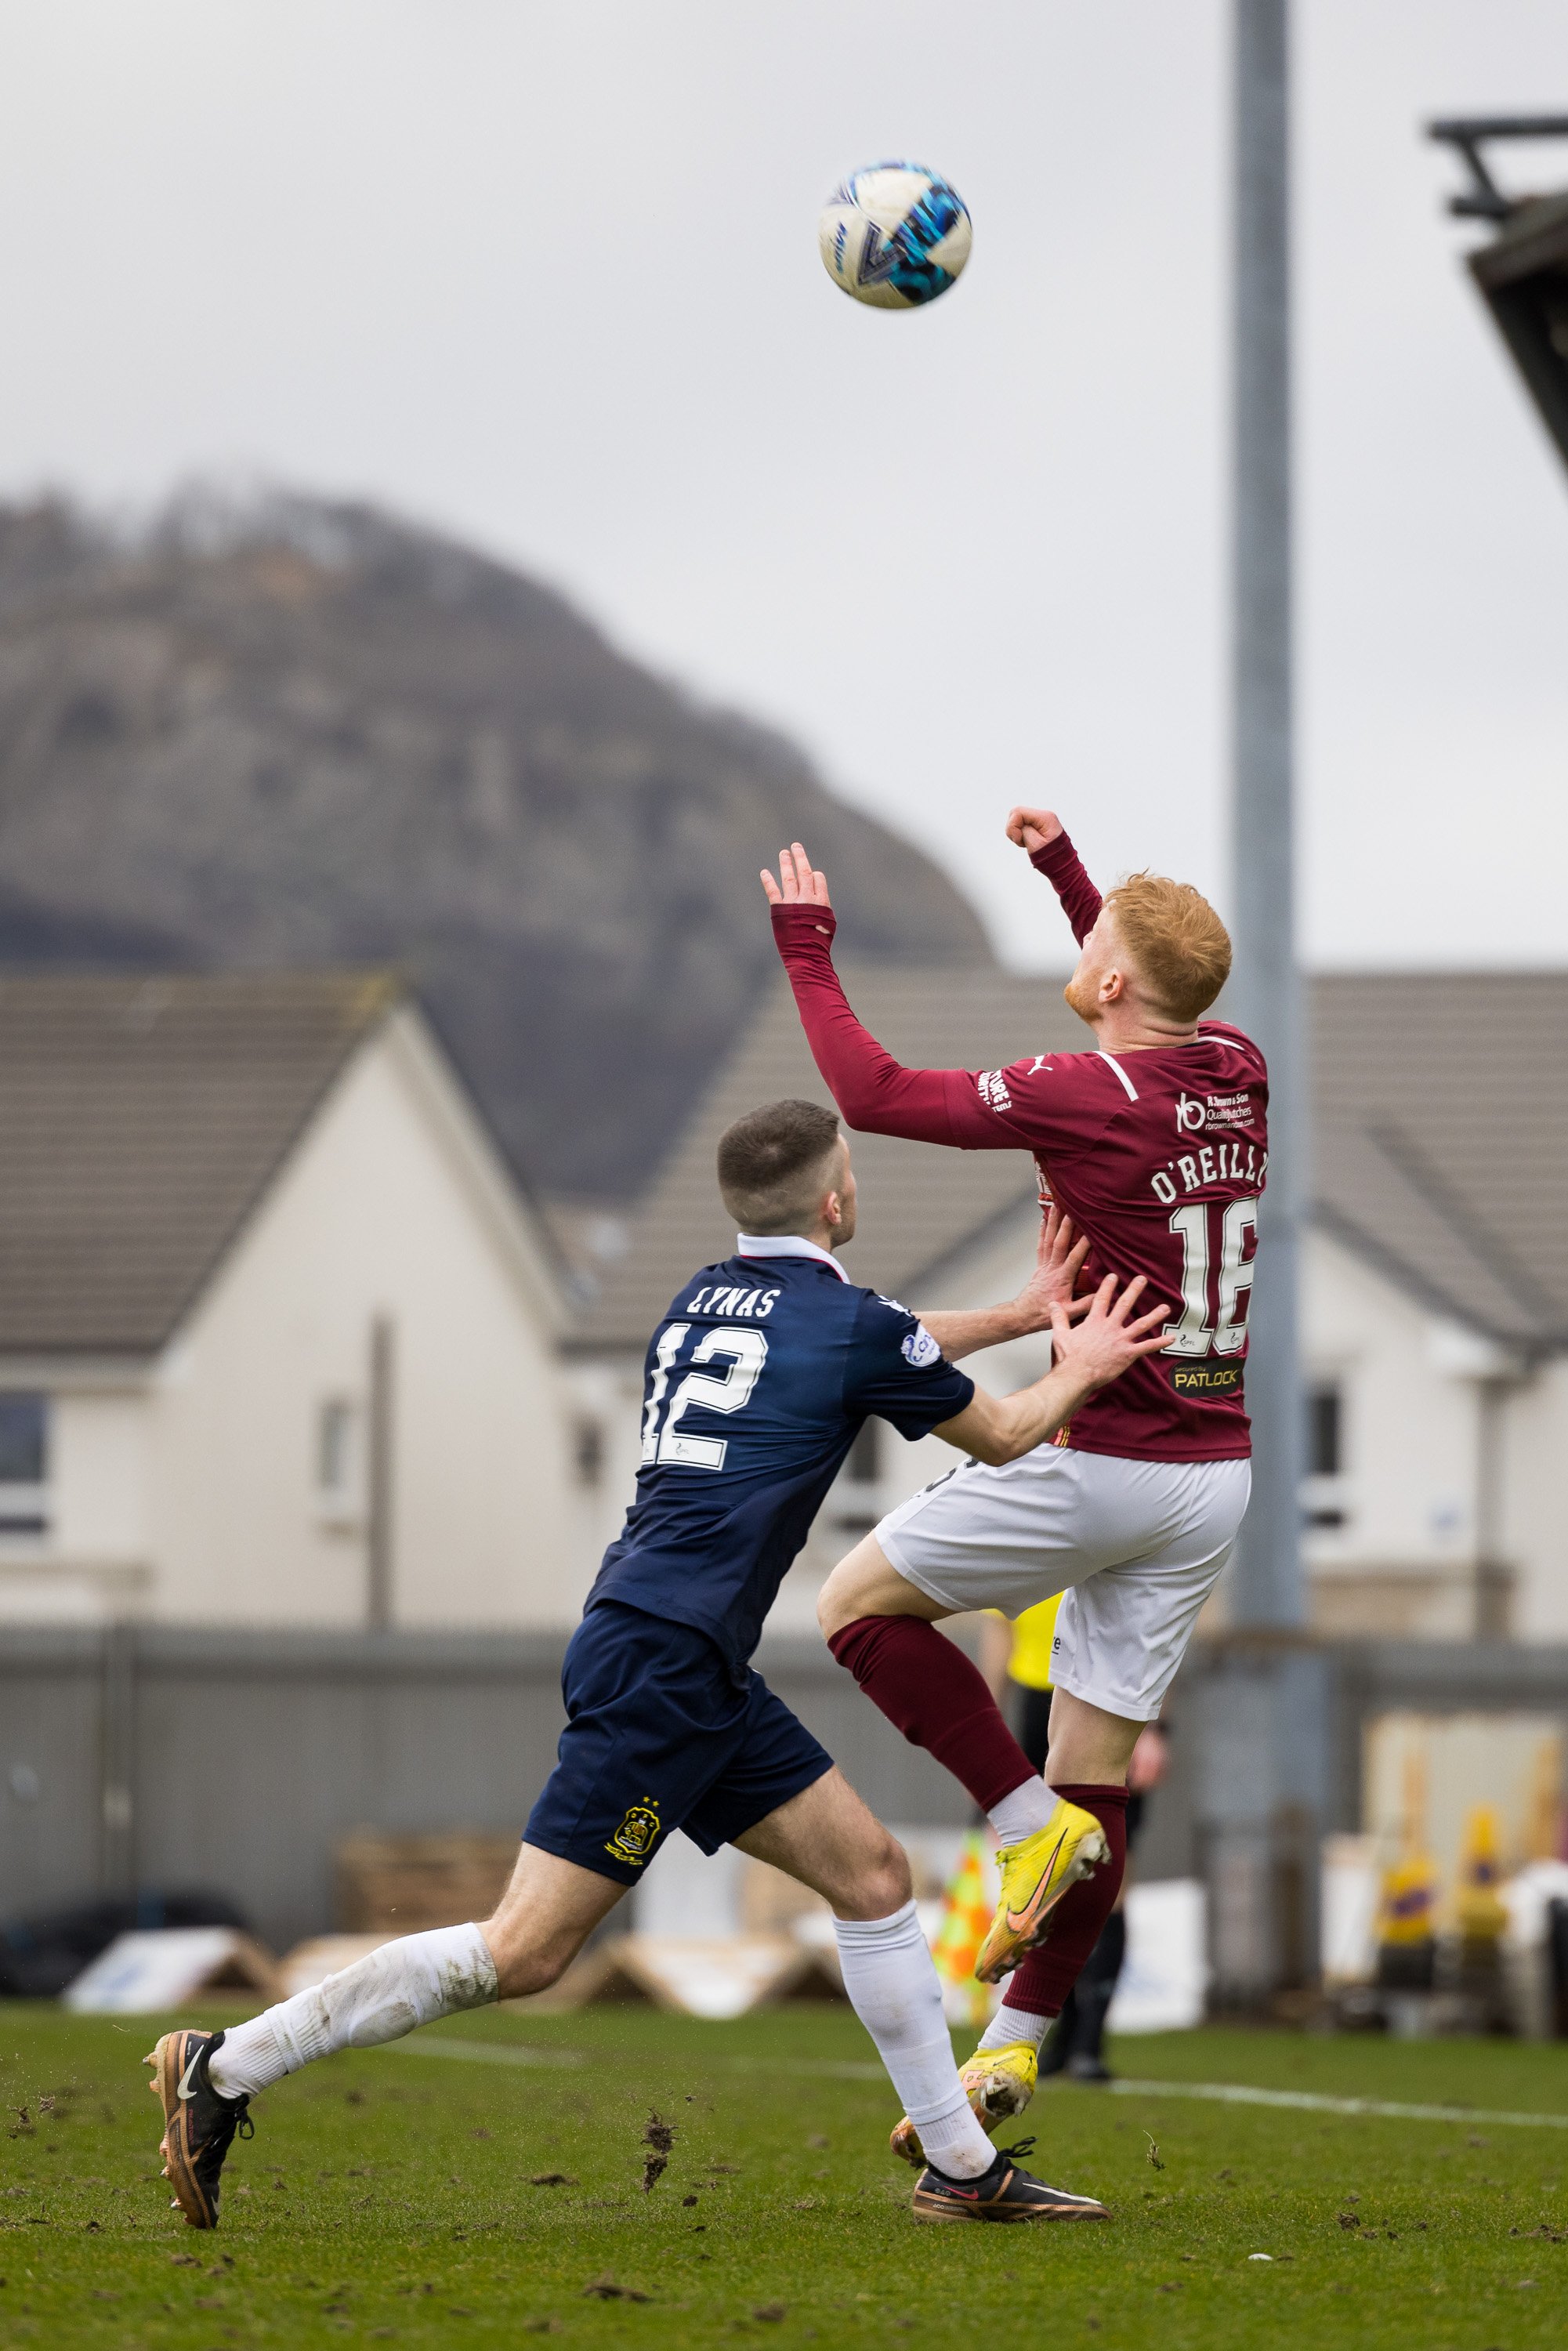  Euan O’Reilly is pushed by a Dumbarton player while rising for a header 